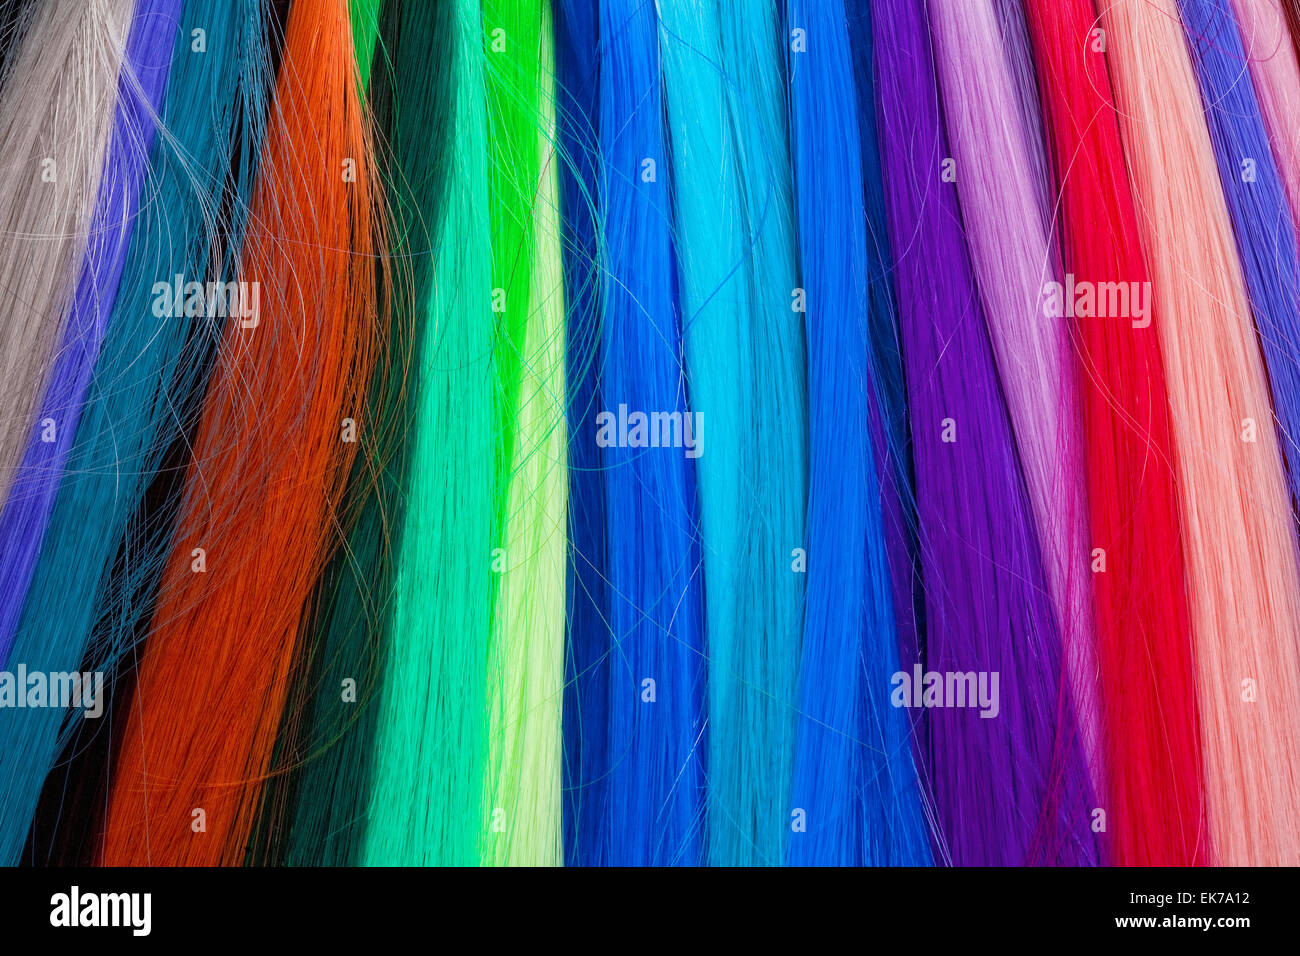 Artificial Hair Used for Production of Wigs and Extensions Stock Photo